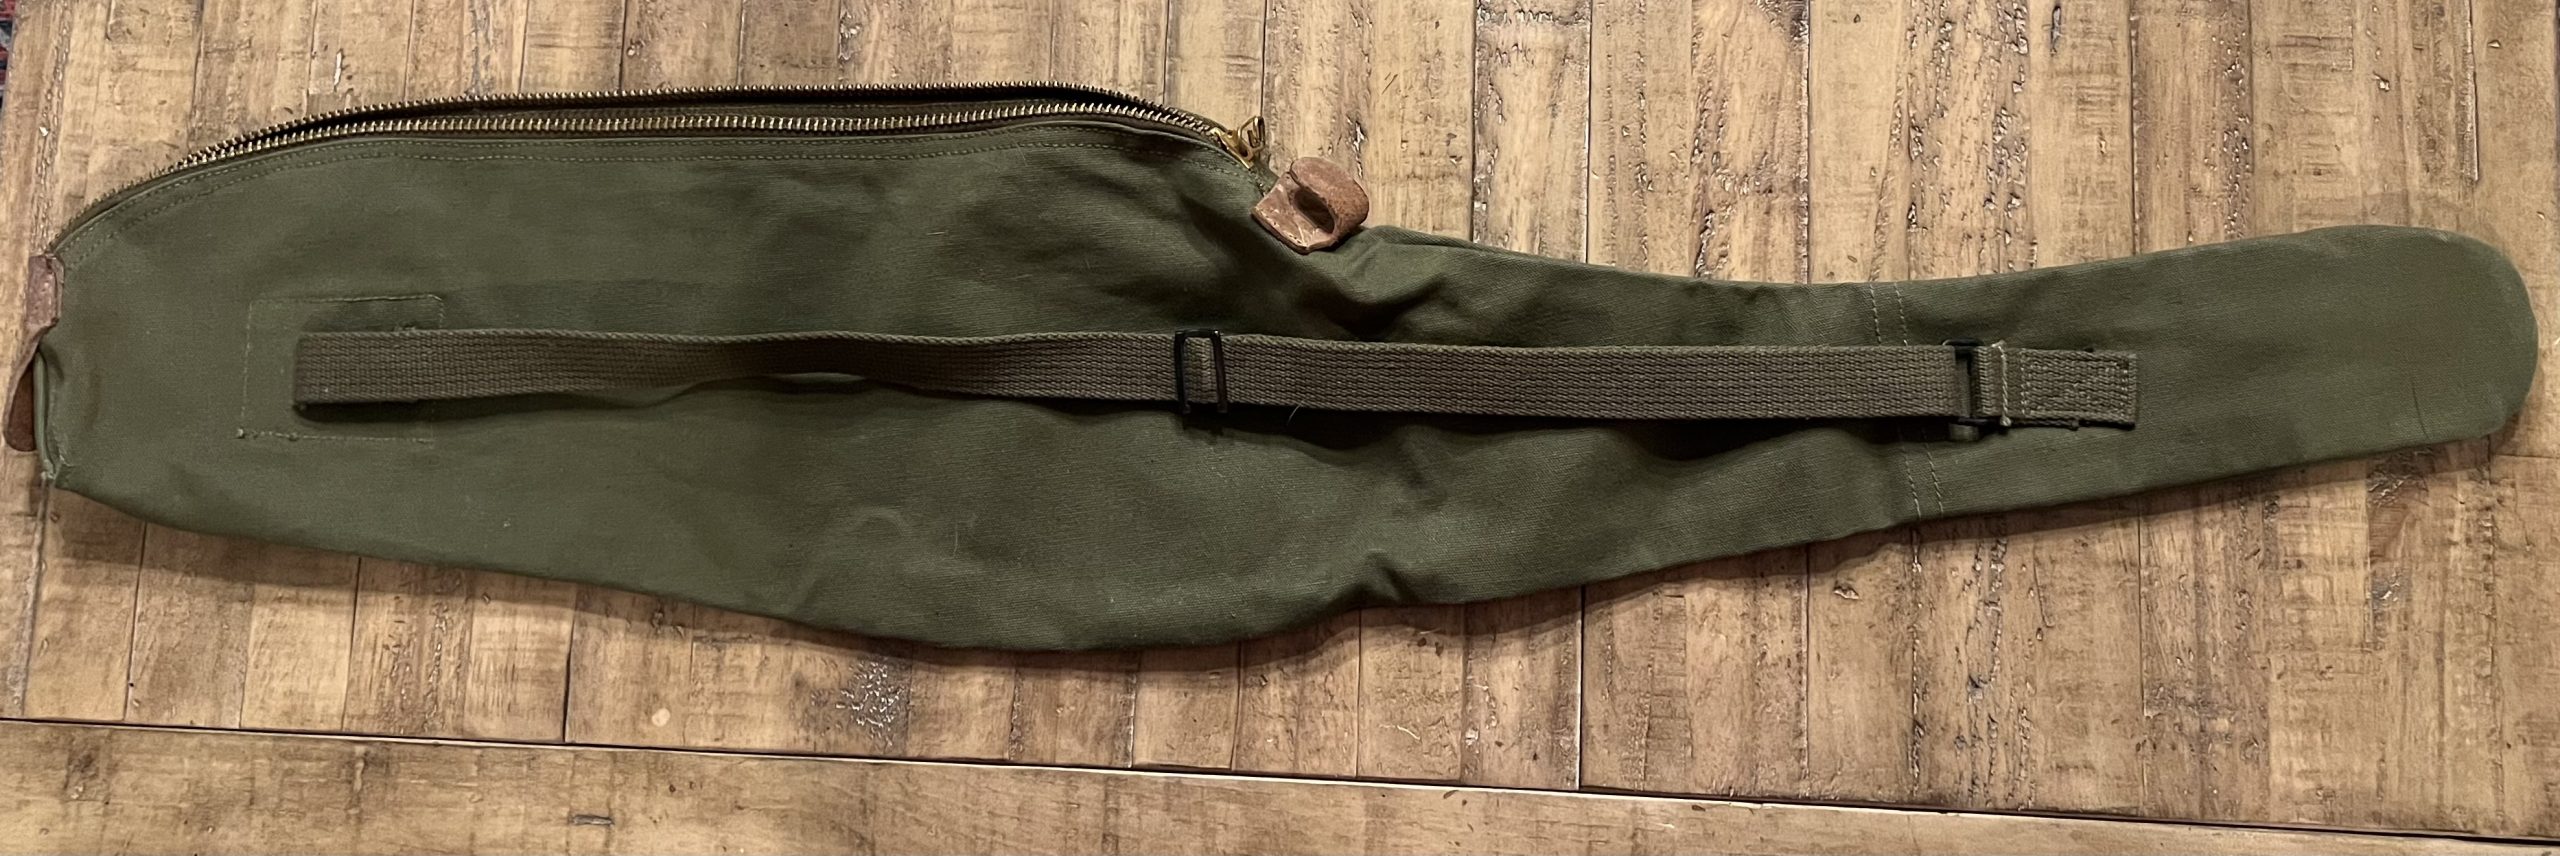 SOLD… MINT WW2 M1 CARBINE CANVAS CARRY CASE M.D. MFG 1944 DATED OLIVE ...